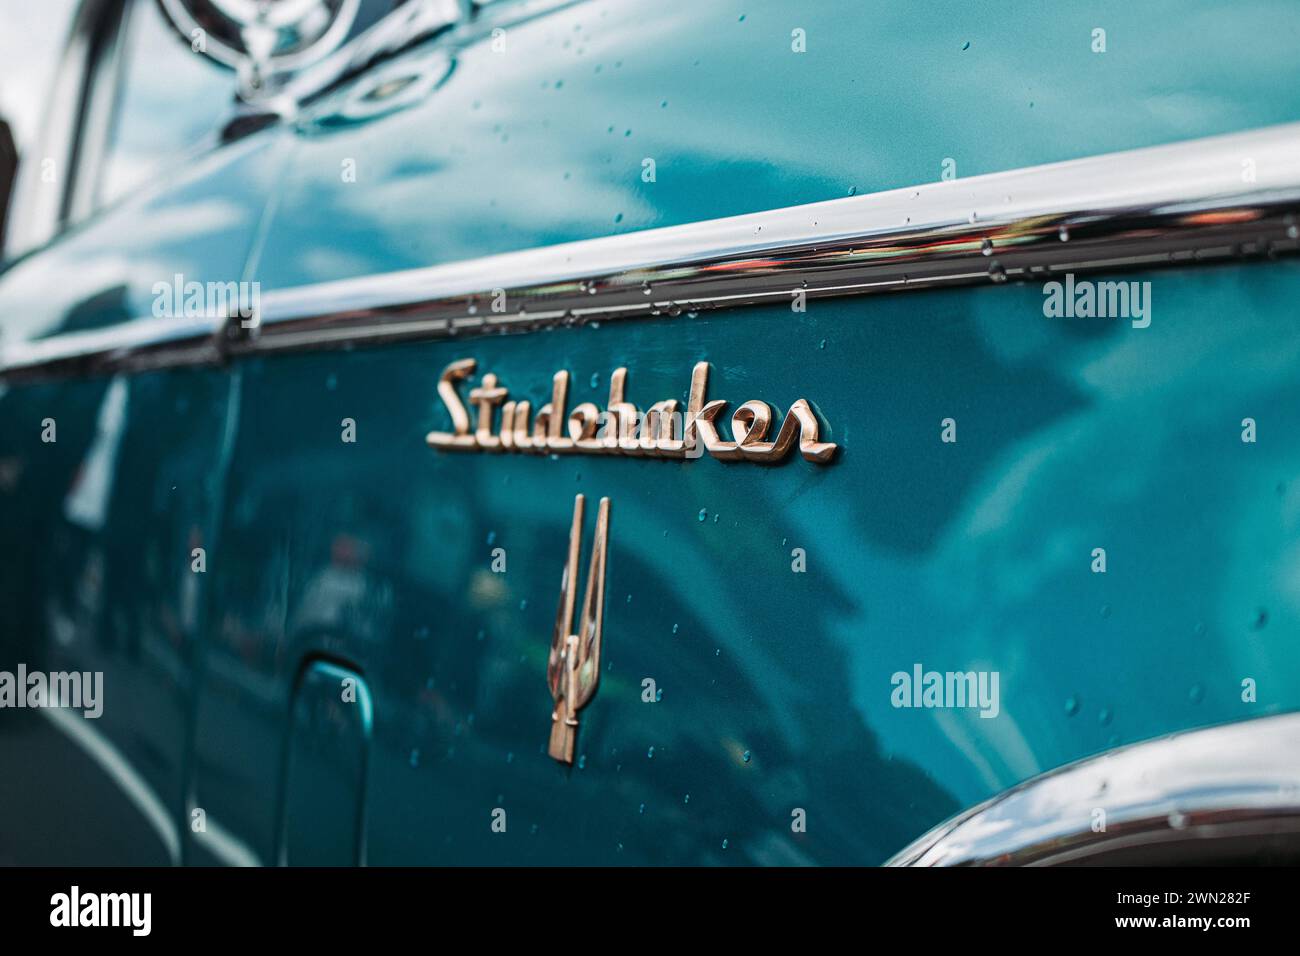 Thames, New Zealand, 24 November 2022, Beach Hop Car Rally: Detail shot - Restored Vintage teal / turquoise Studebaker with raindrops. Stock Photo